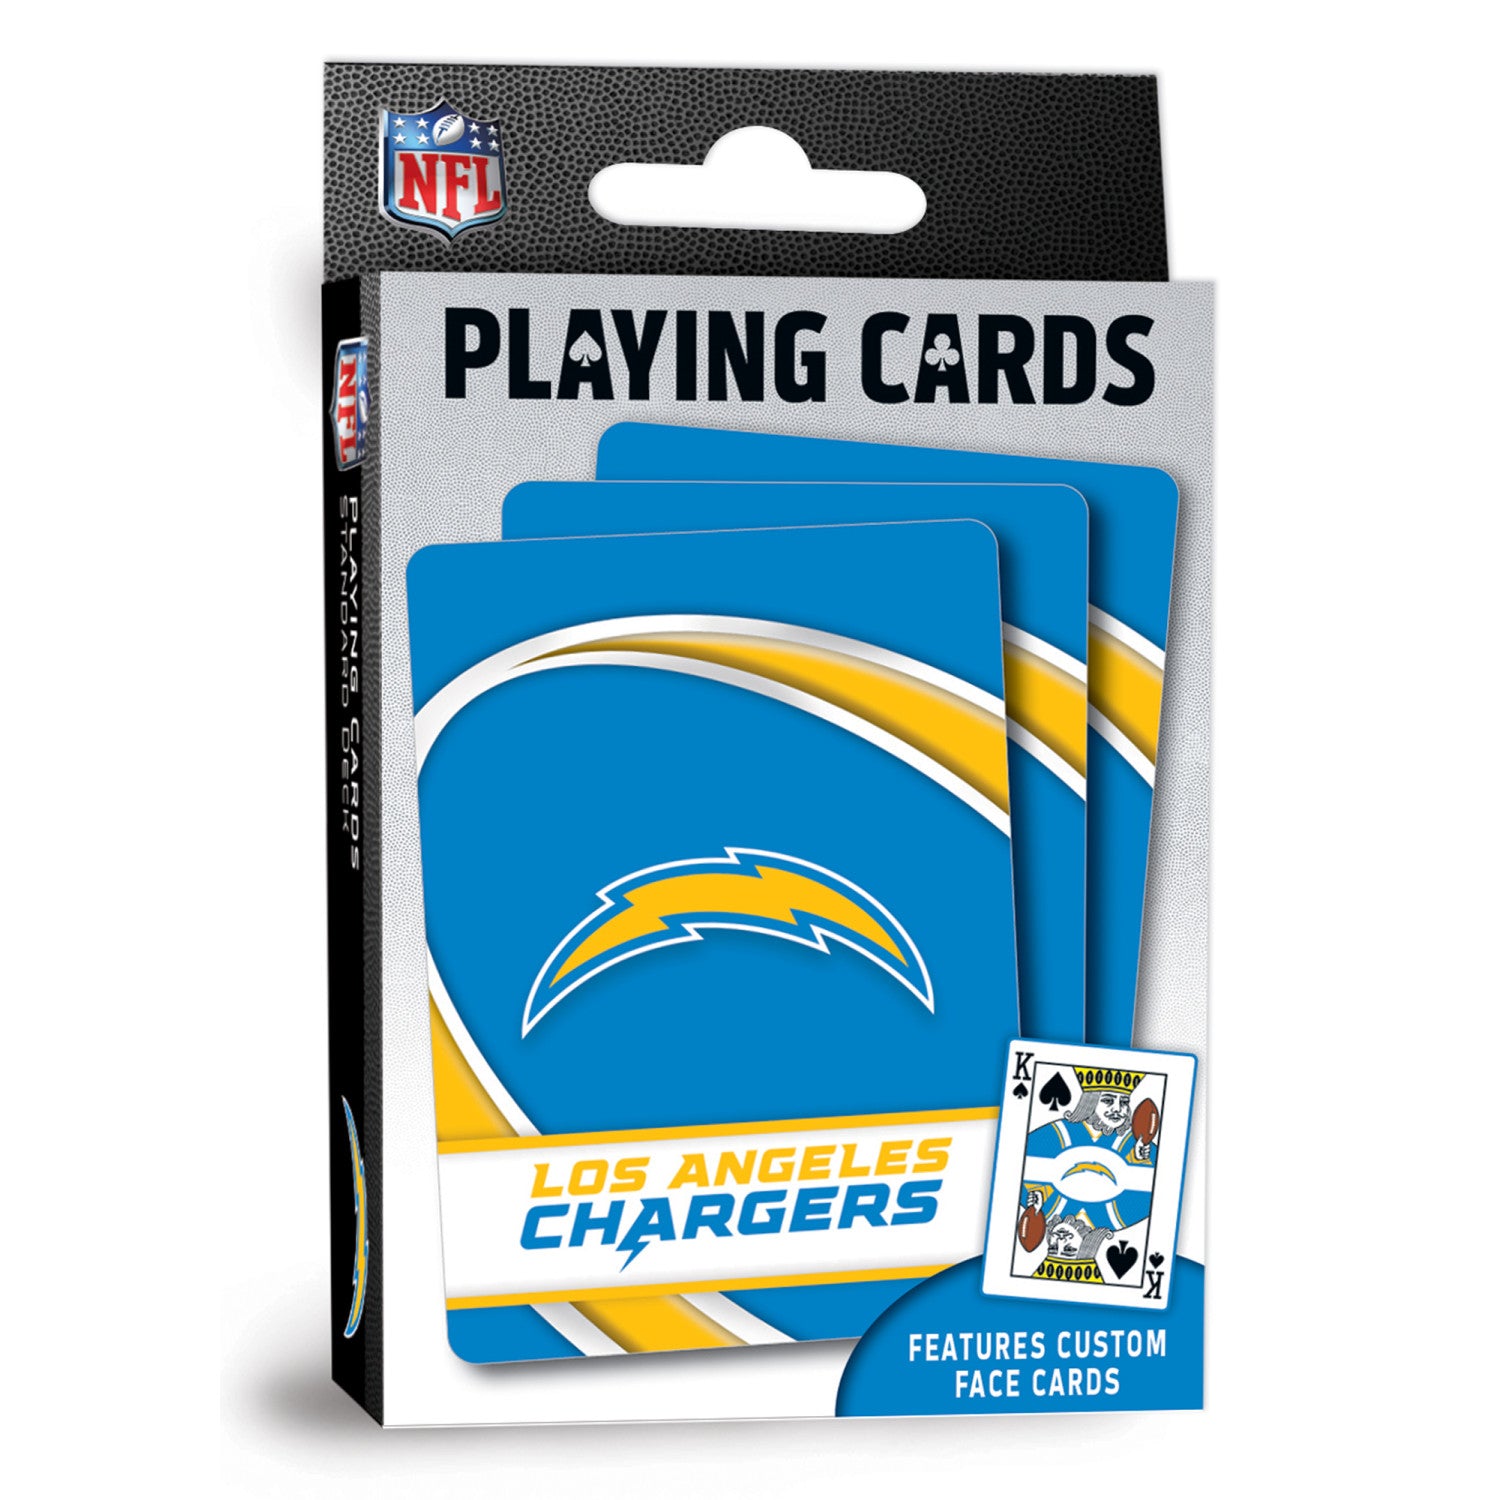 Los Angeles Chargers Playing Cards - 54 Card Deck